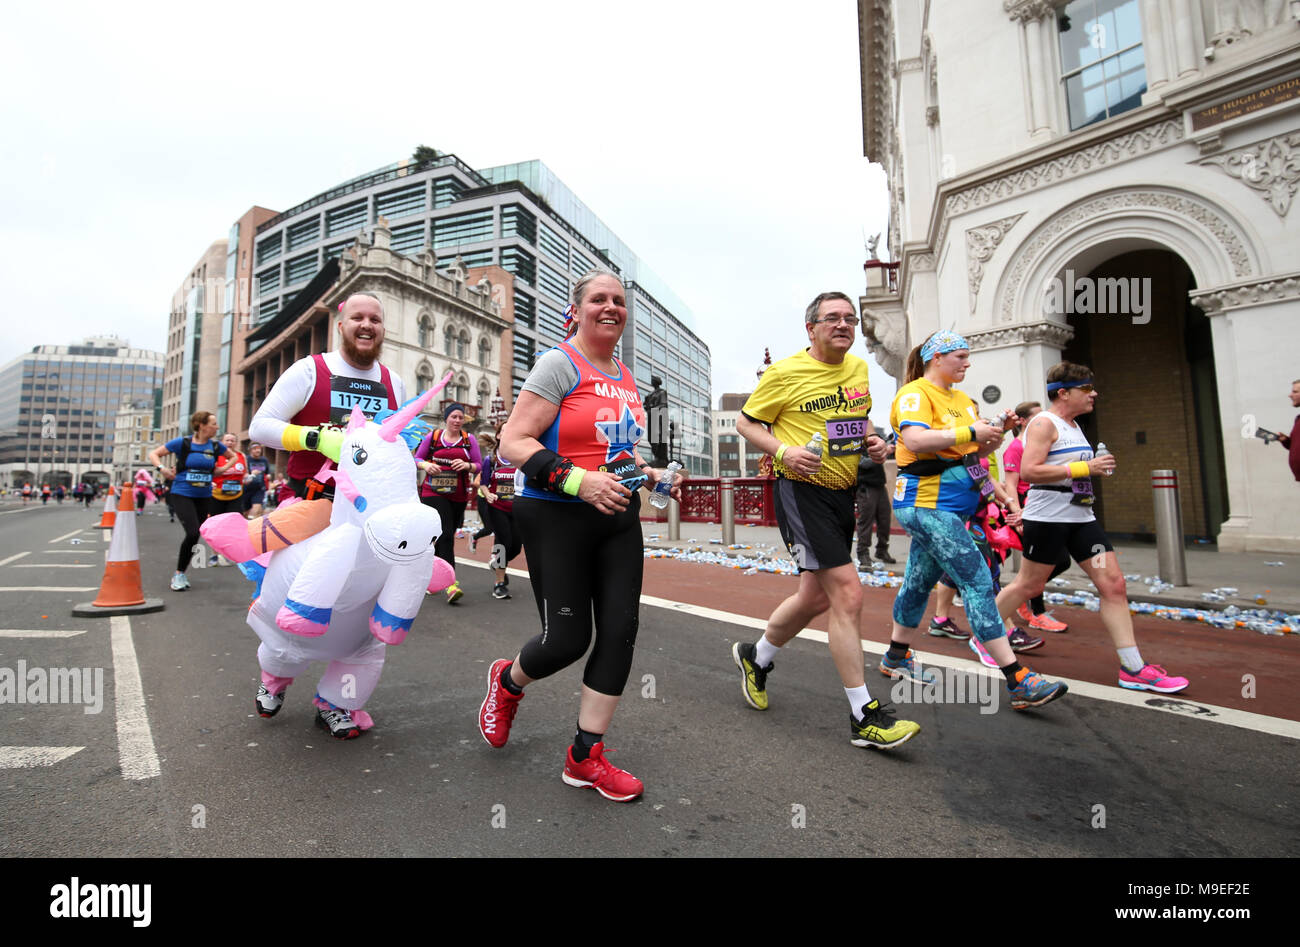 Runners in fancy dress in action during the 2018 London Landmarks Half Marathon. PRESS ASSOCIATION Photo. Picture date: Sunday March 25, 2018. Photo credit should read: Steven Paston/PA Wire Stock Photo